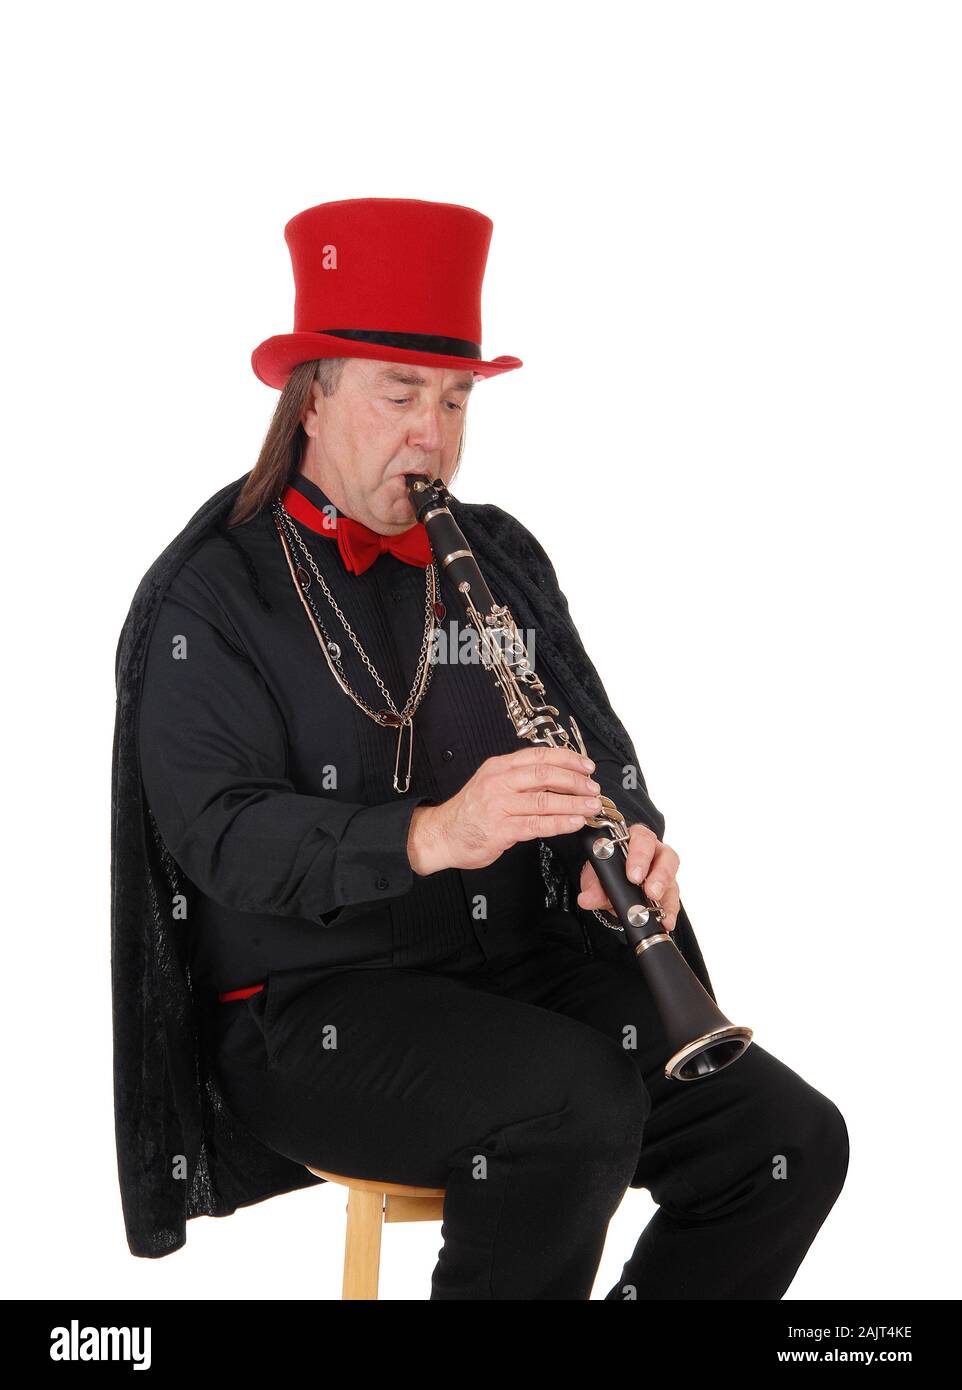 A middle age indigenous man playing his clarinet in a black outfit and red hat and bow, isolated for white background Stock Photo